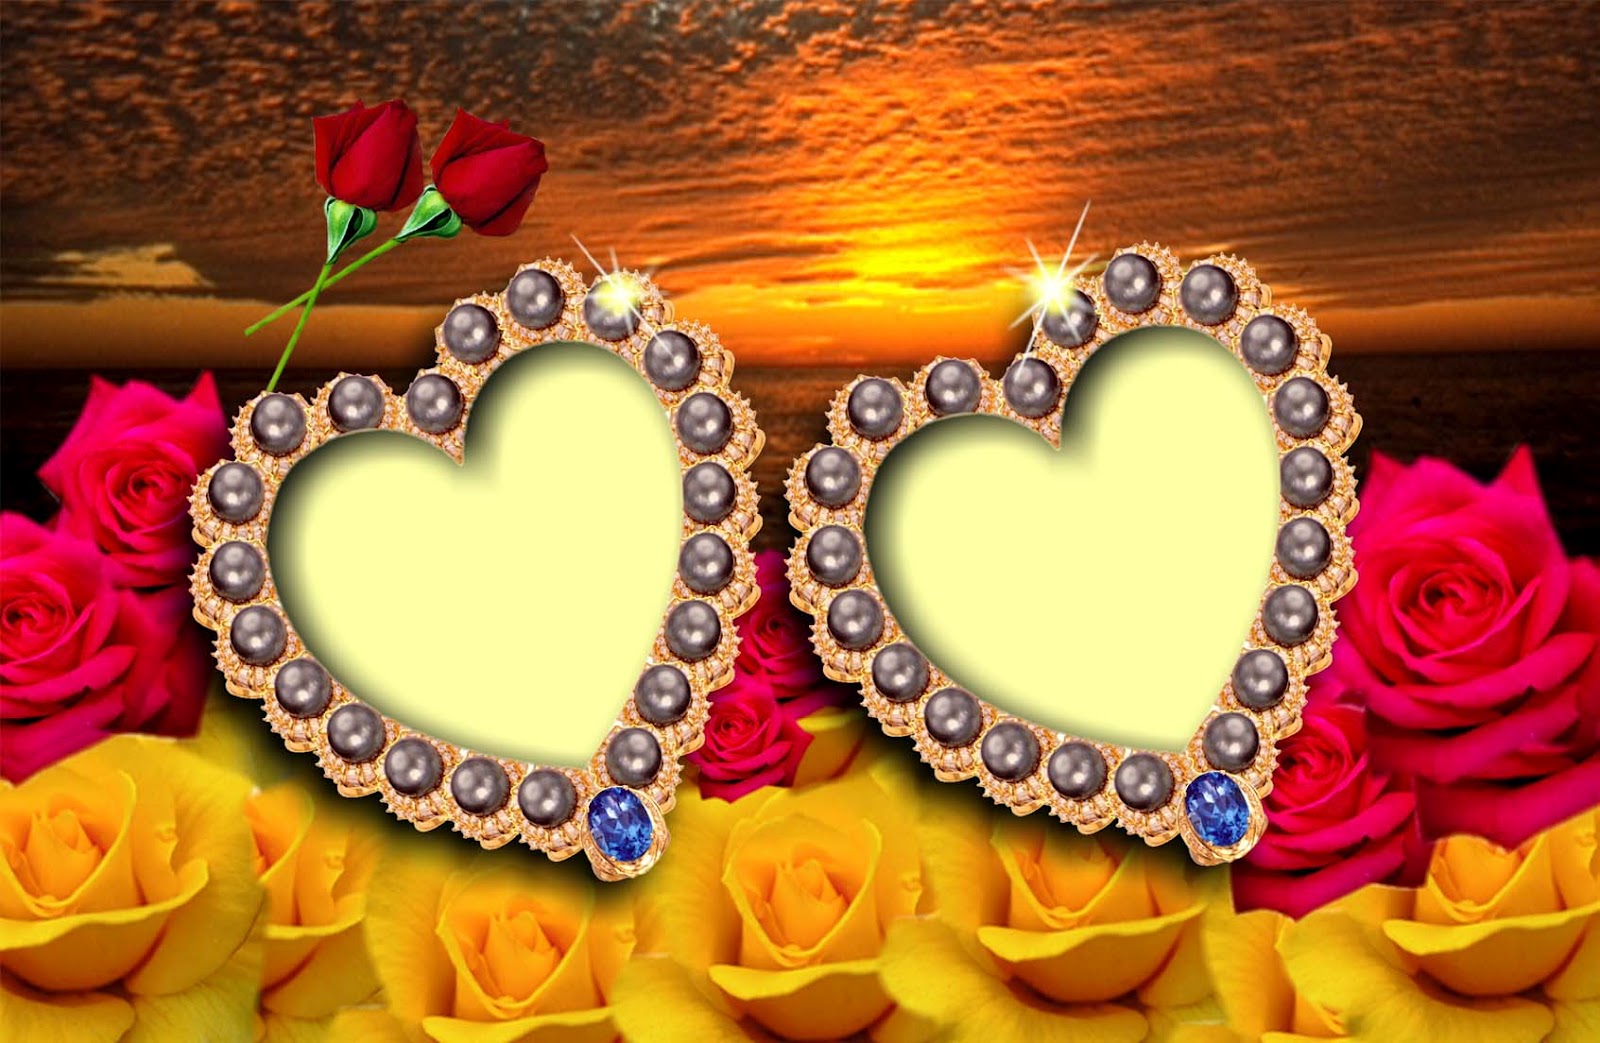 clip art free wedding picture frames - photo #16